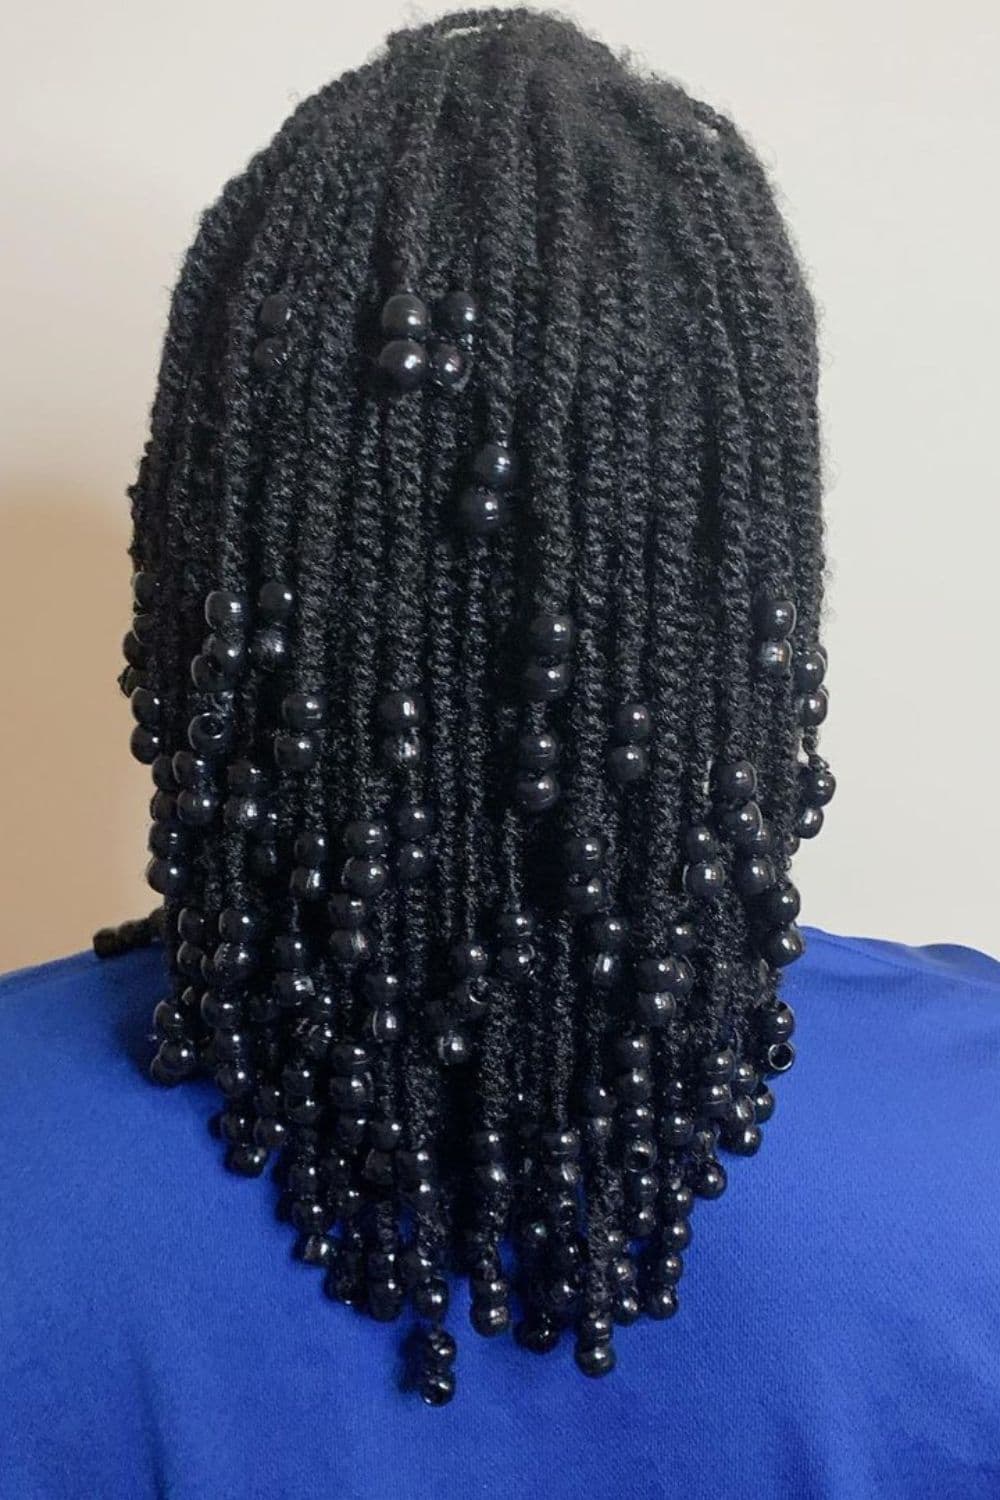 A person with two-strand twists with black beads on ends.